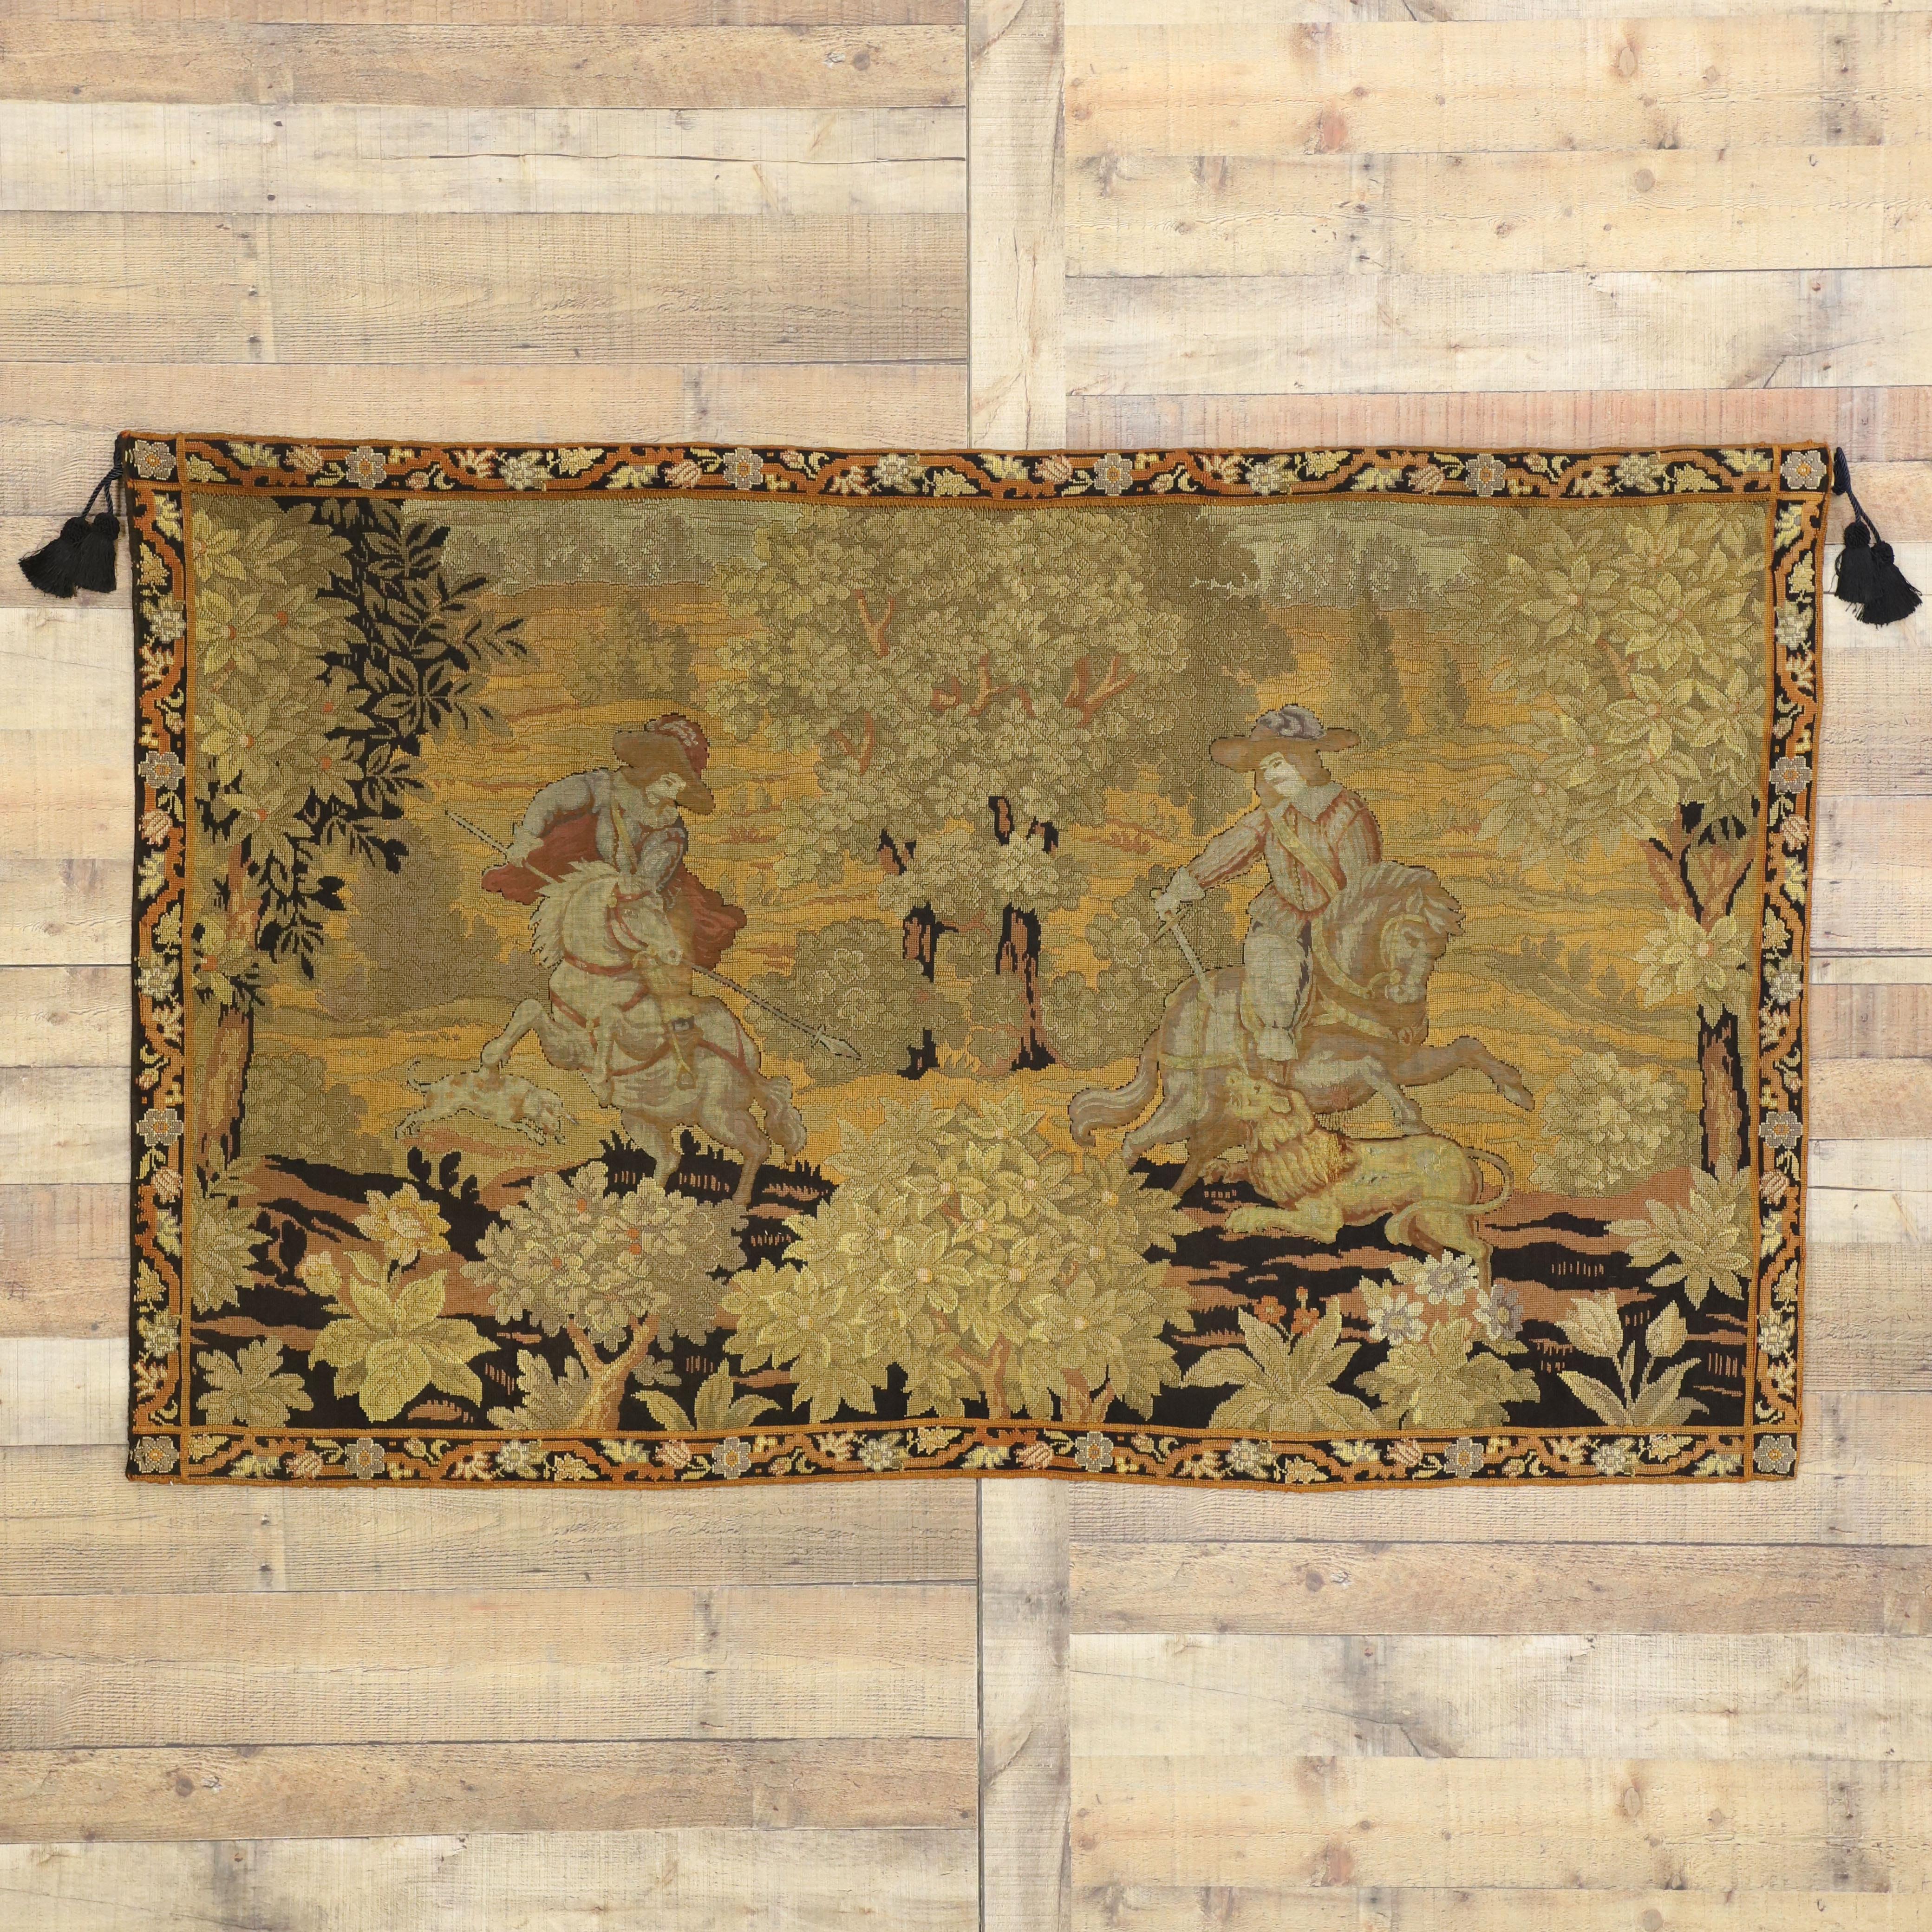 Antique English Tapestry with Medieval Hunting Scene, Wall Hanging 1